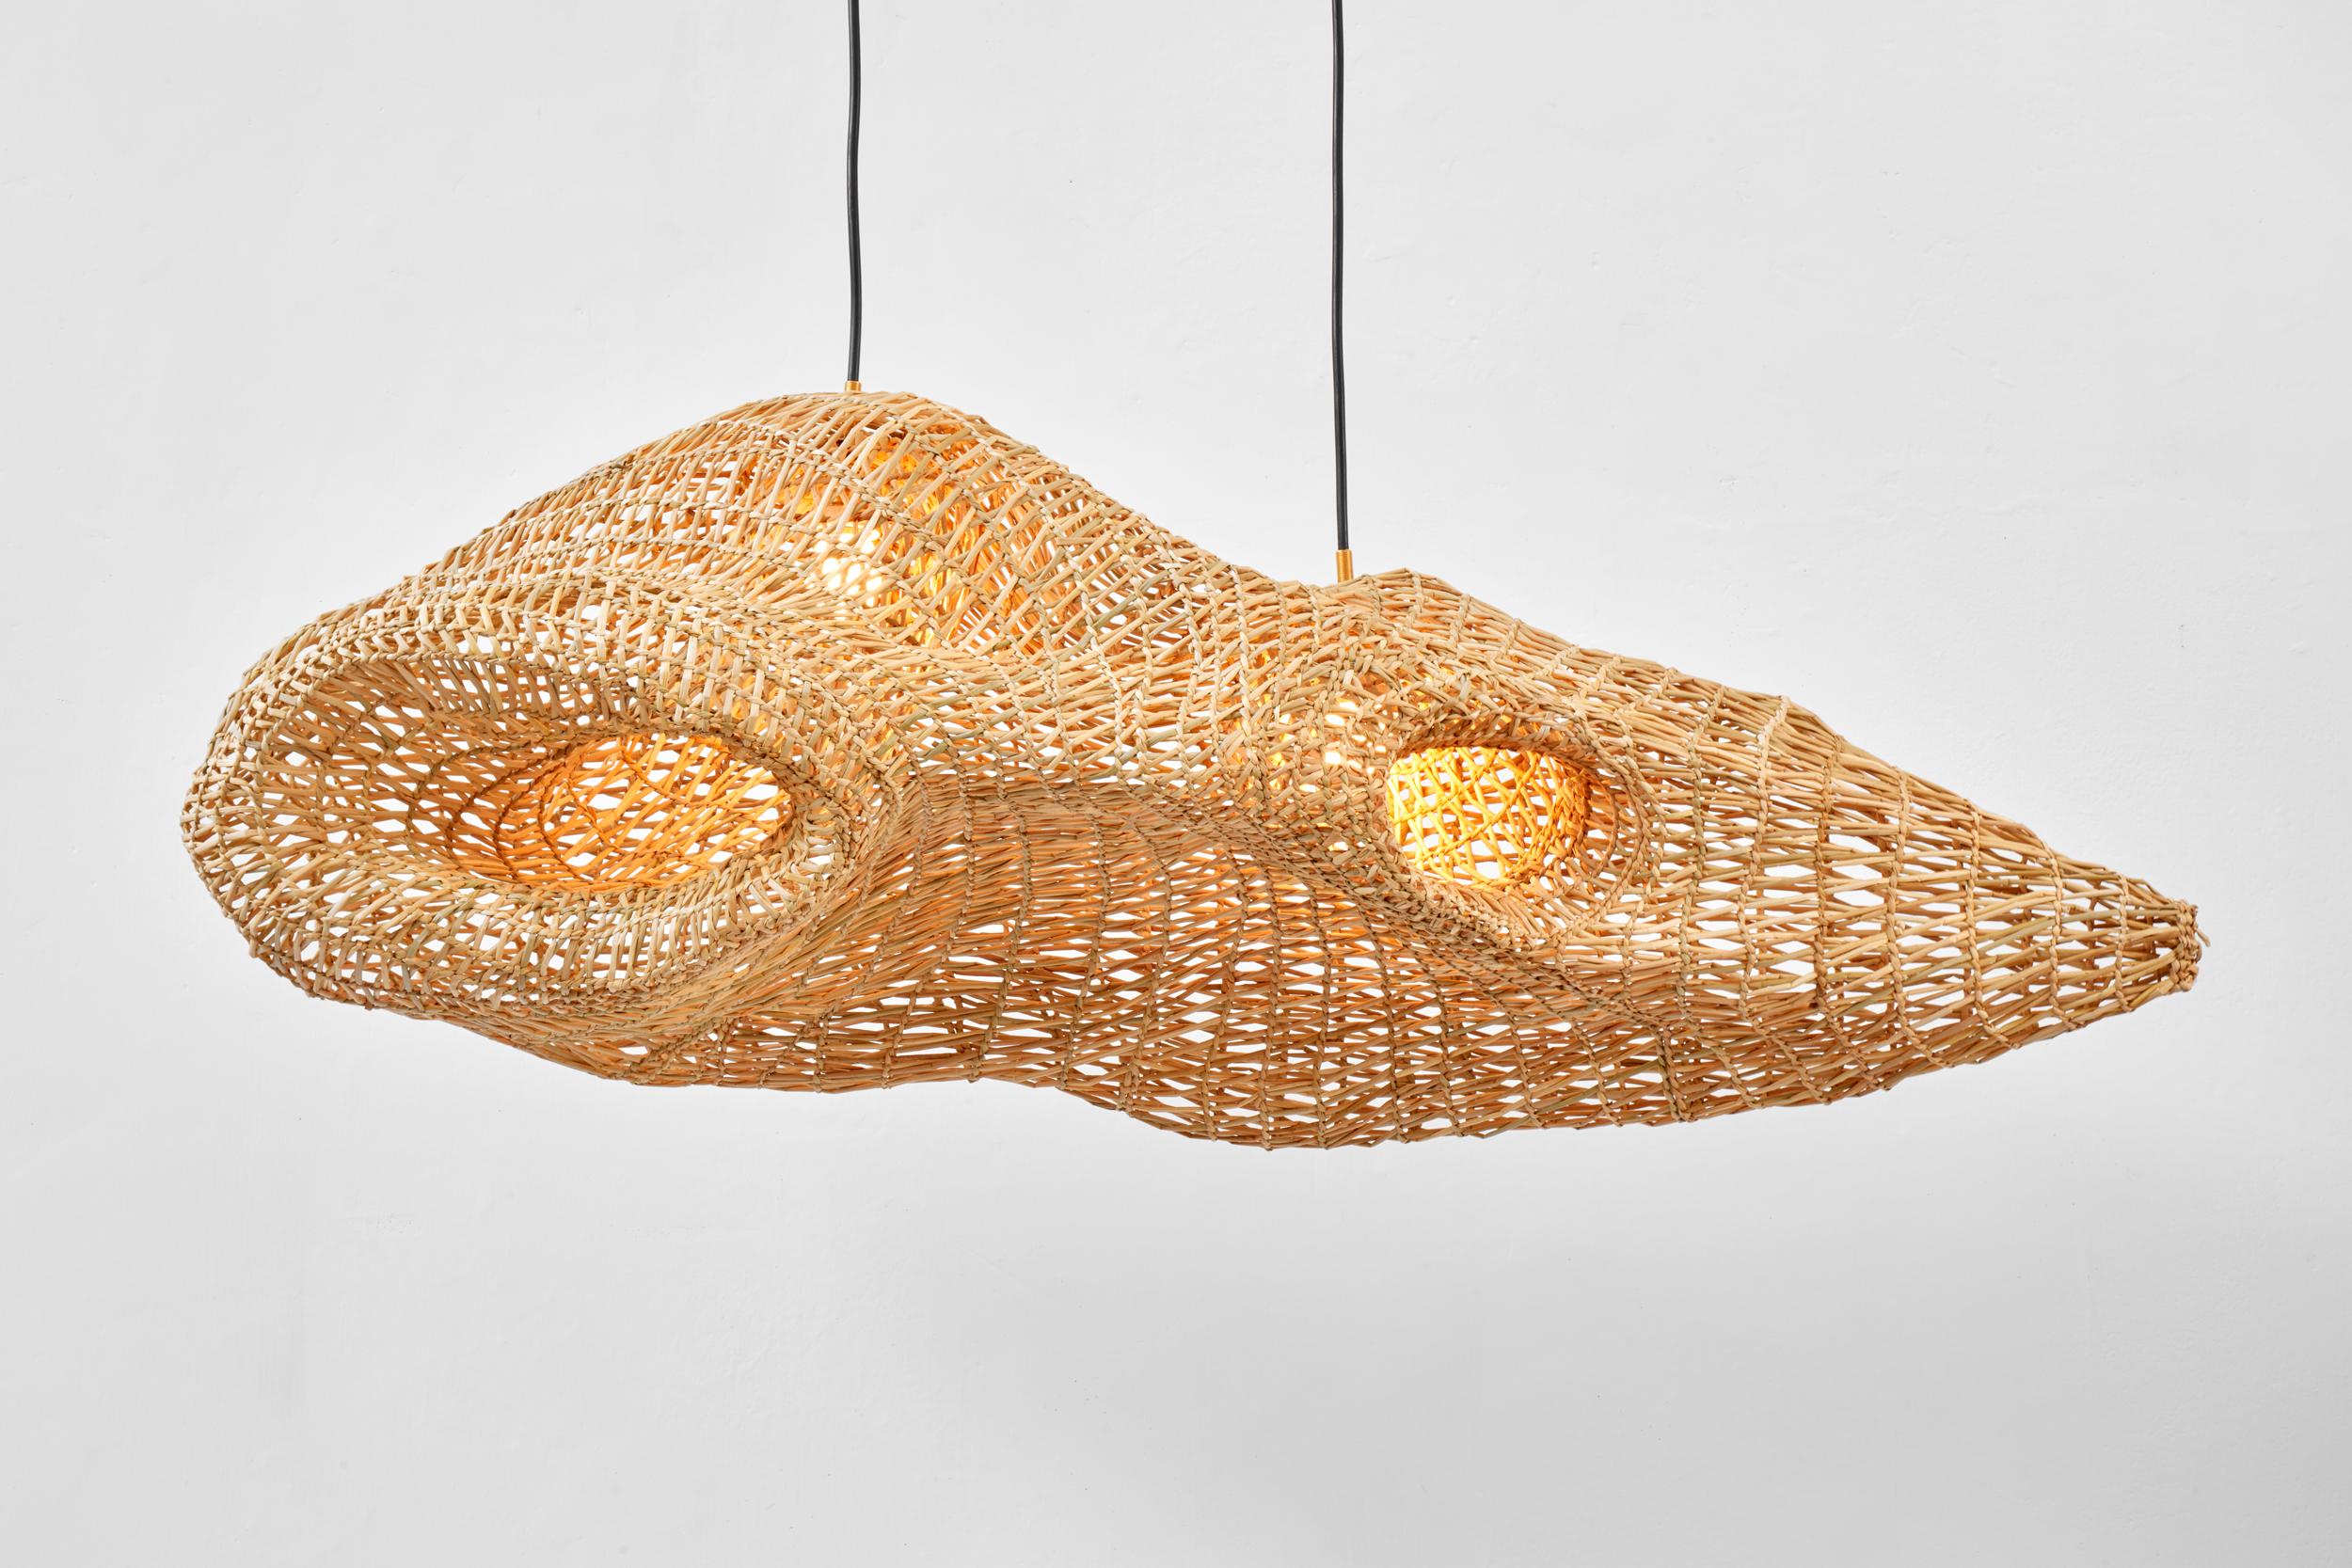 Vegetable Fabrics N°11 Cloud Pendant Lamp by Estudio Rafael Freyre
Dimensions: W 110 x D 40 x H 30 cm 
Materials: Reed

Vegetable Fabrics brings us closer to the processes of growth and transformation of the plant organism, posing a relationship